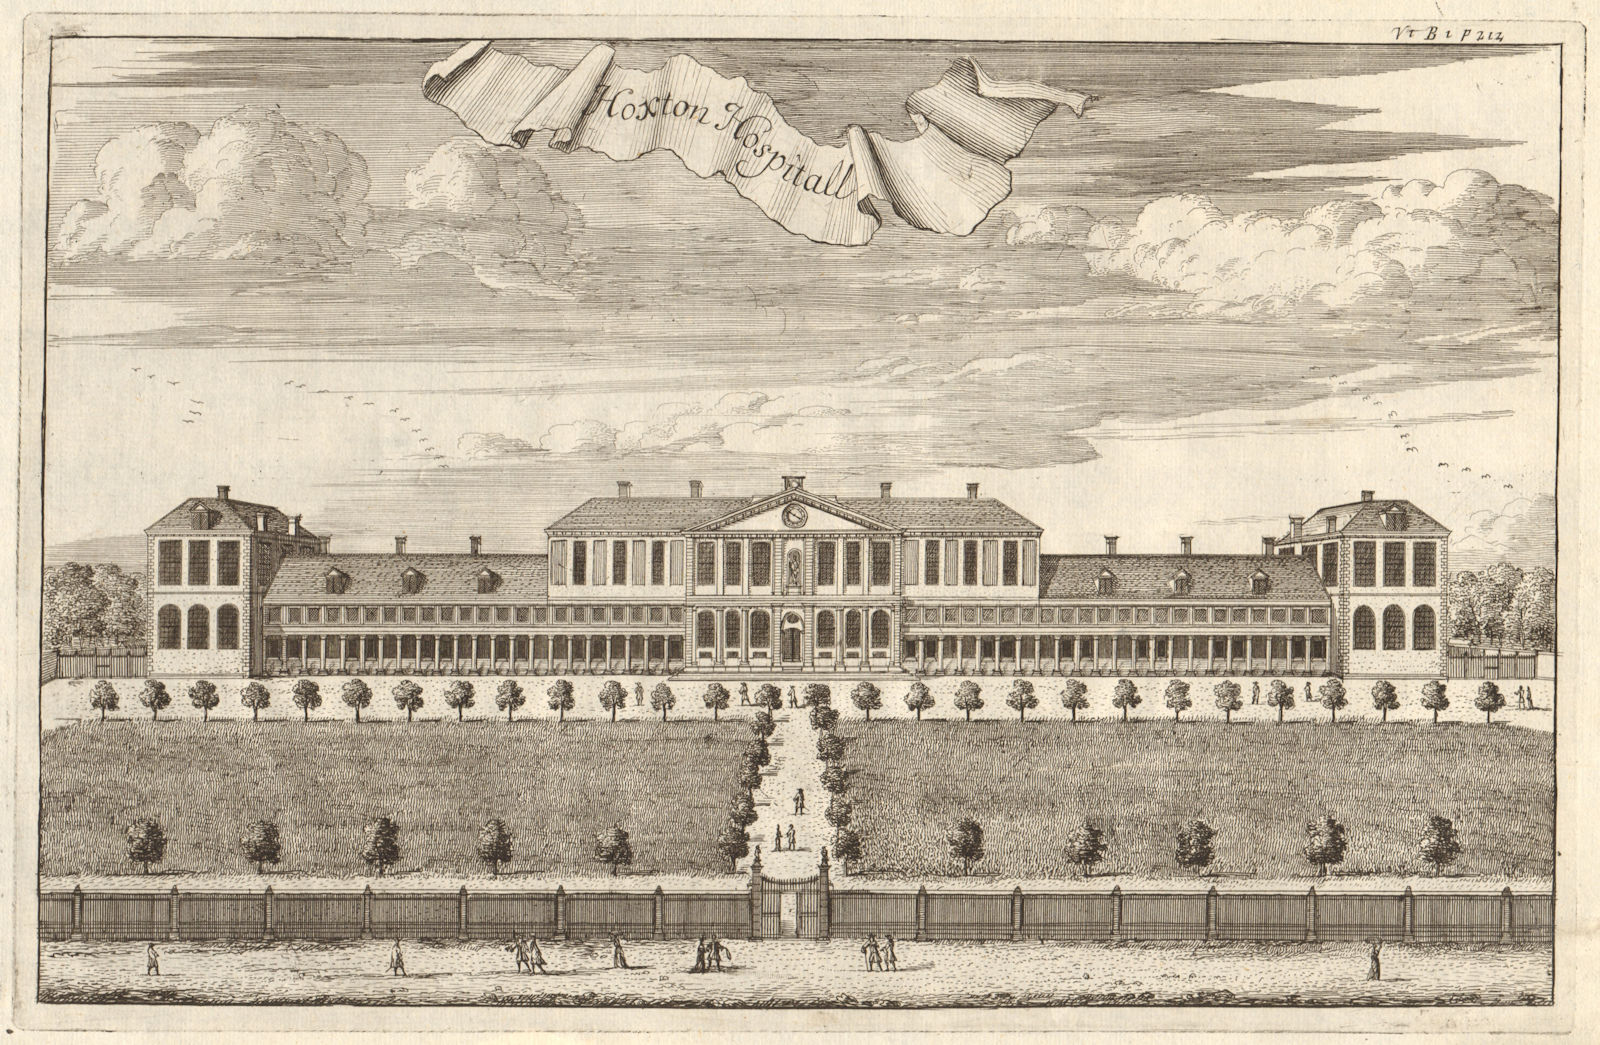 Associate Product 'Hoxton Hospitall'. Haberdashers Aske's school/almshouses. STOW/STRYPE 1720